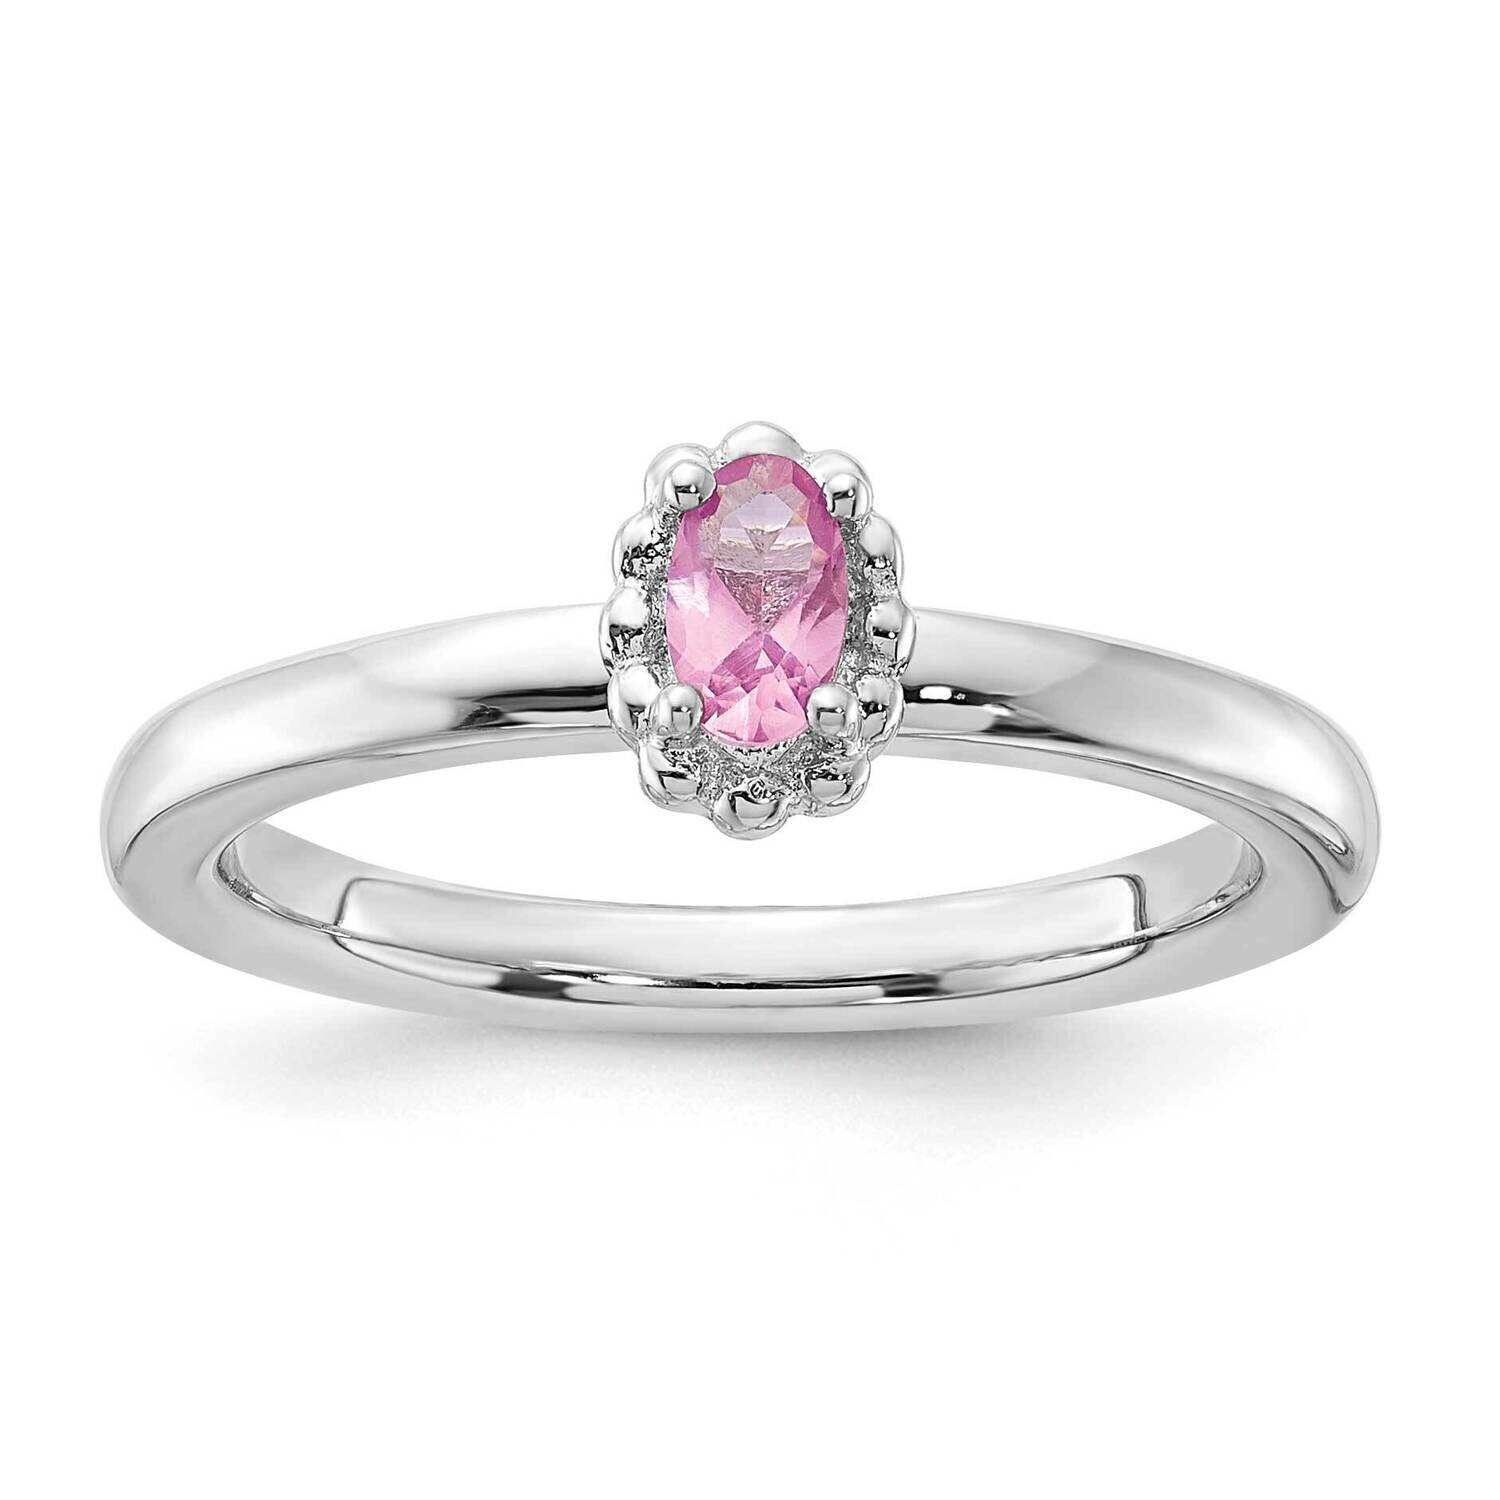 Stackable Expressions Created Pink Sapphire Ring Sterling Silver QSK1268